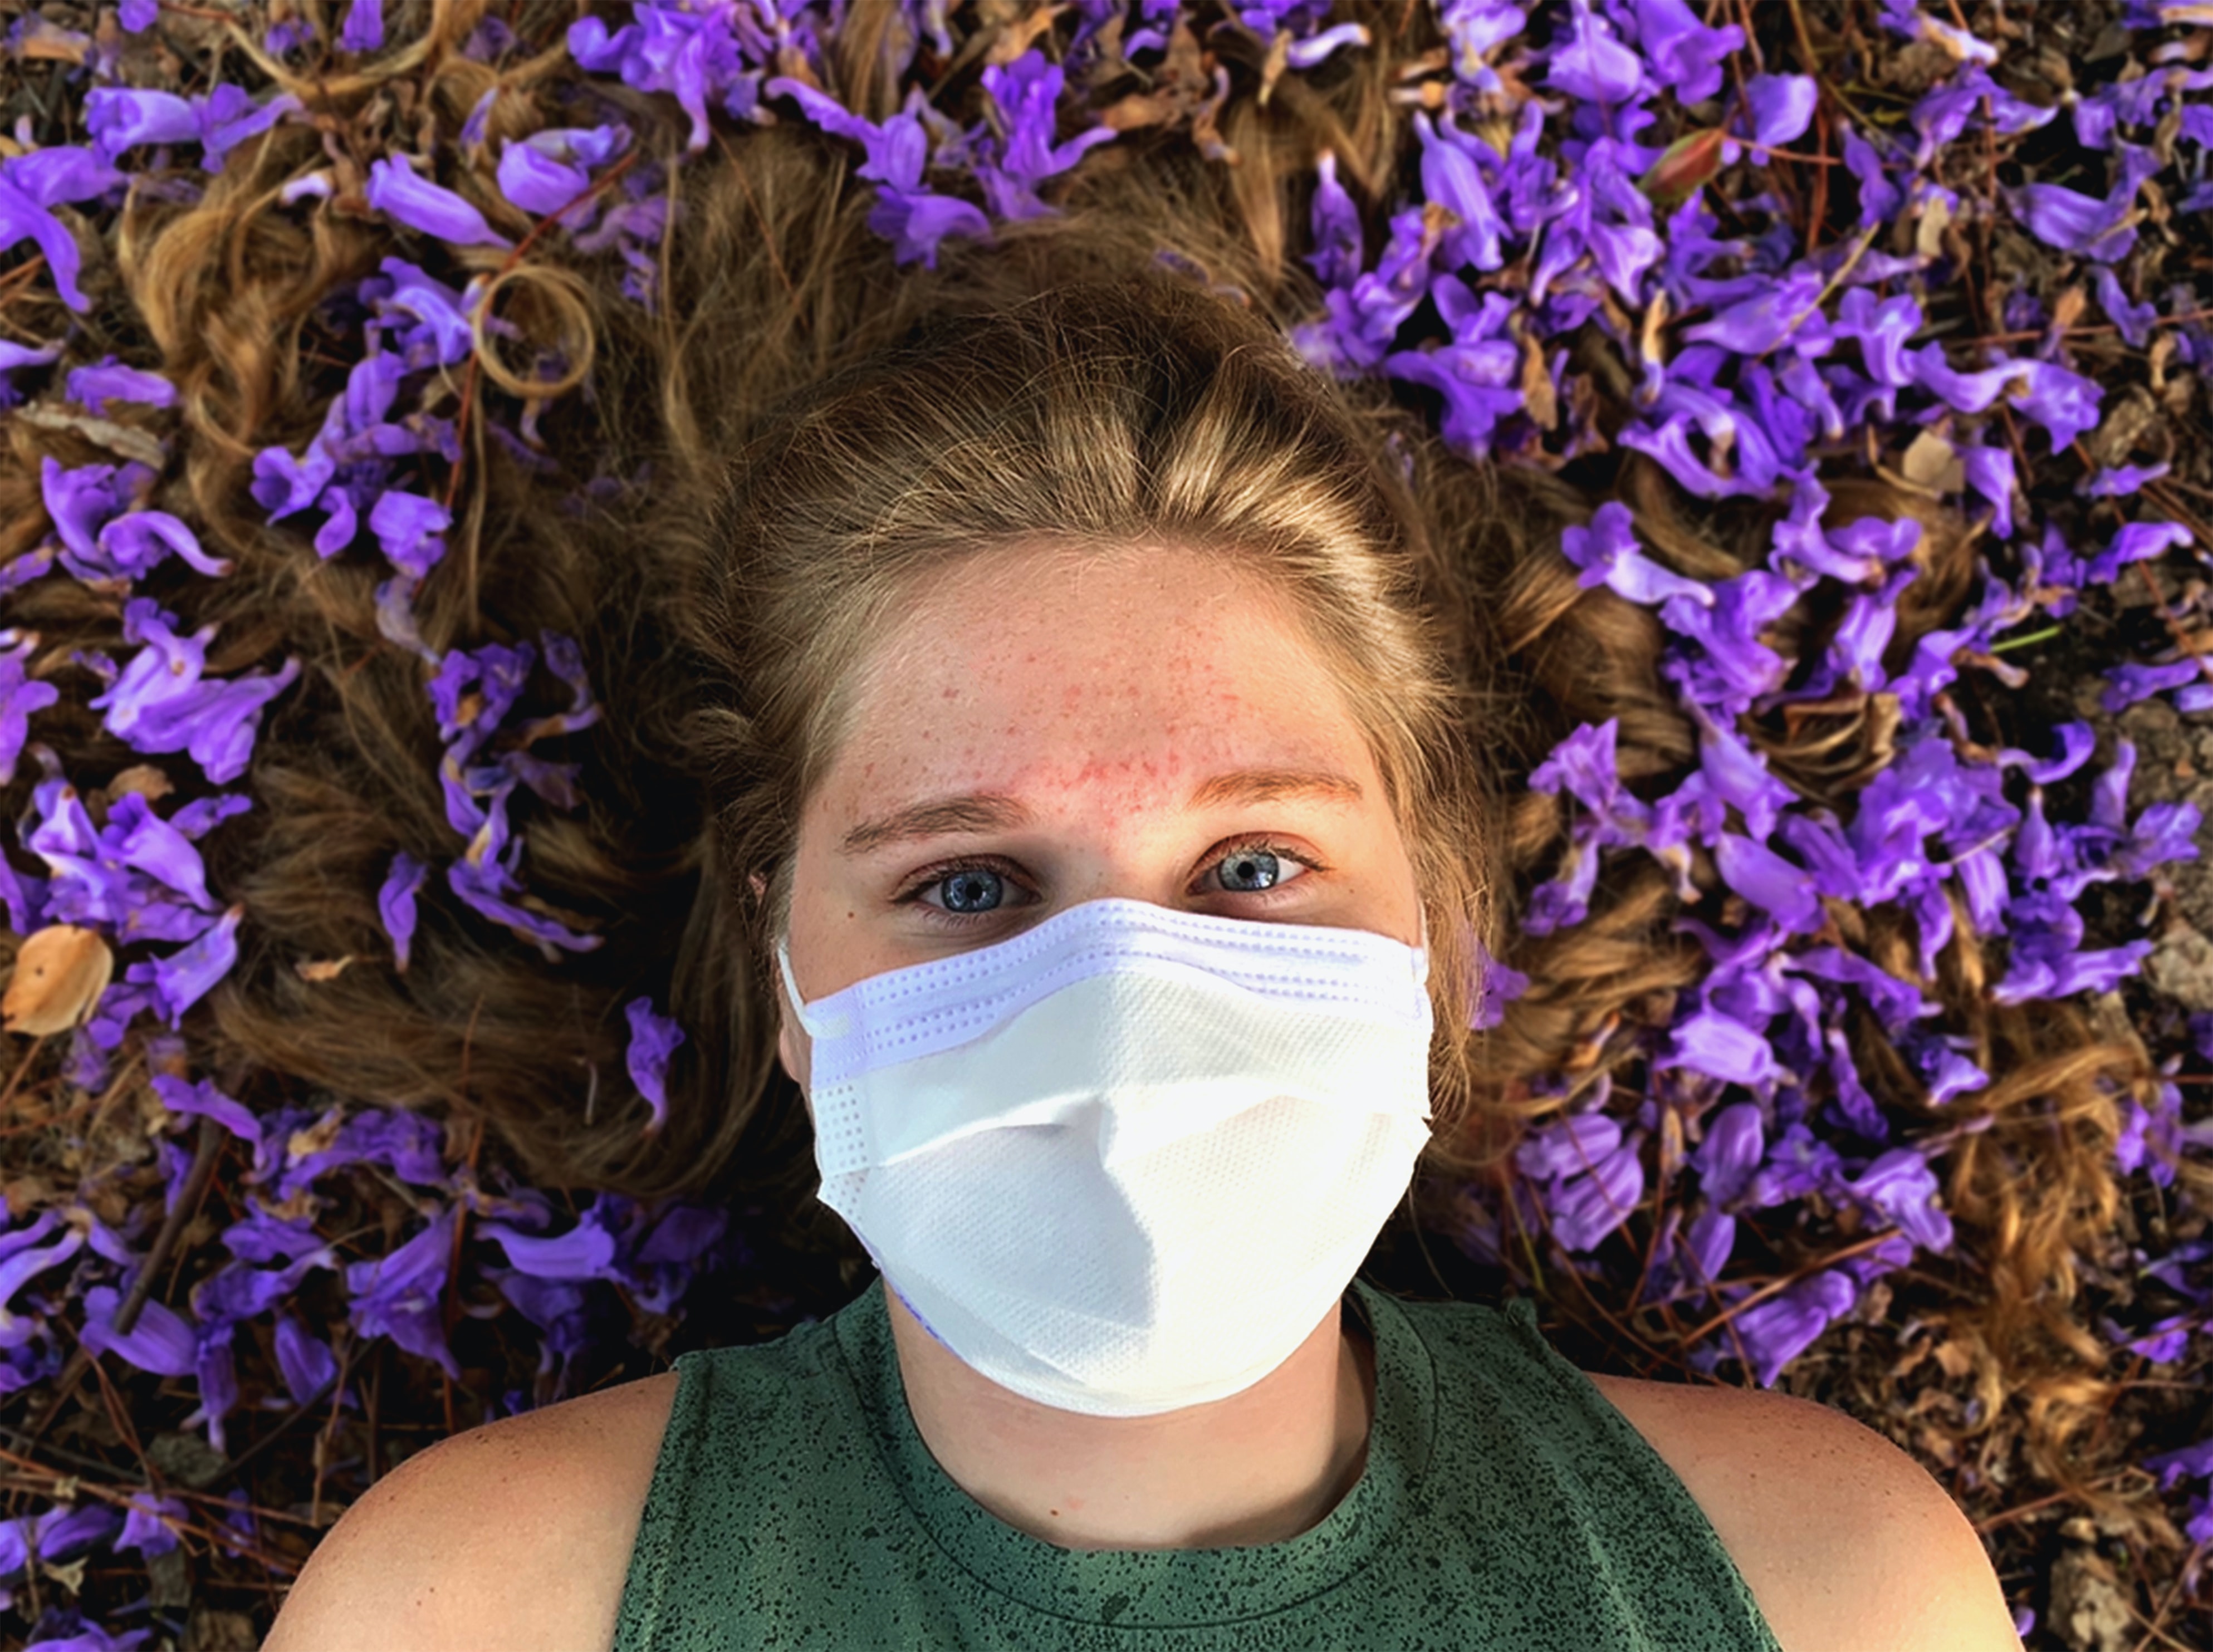 A blond haired woman wearing a face mask lays near flowers.